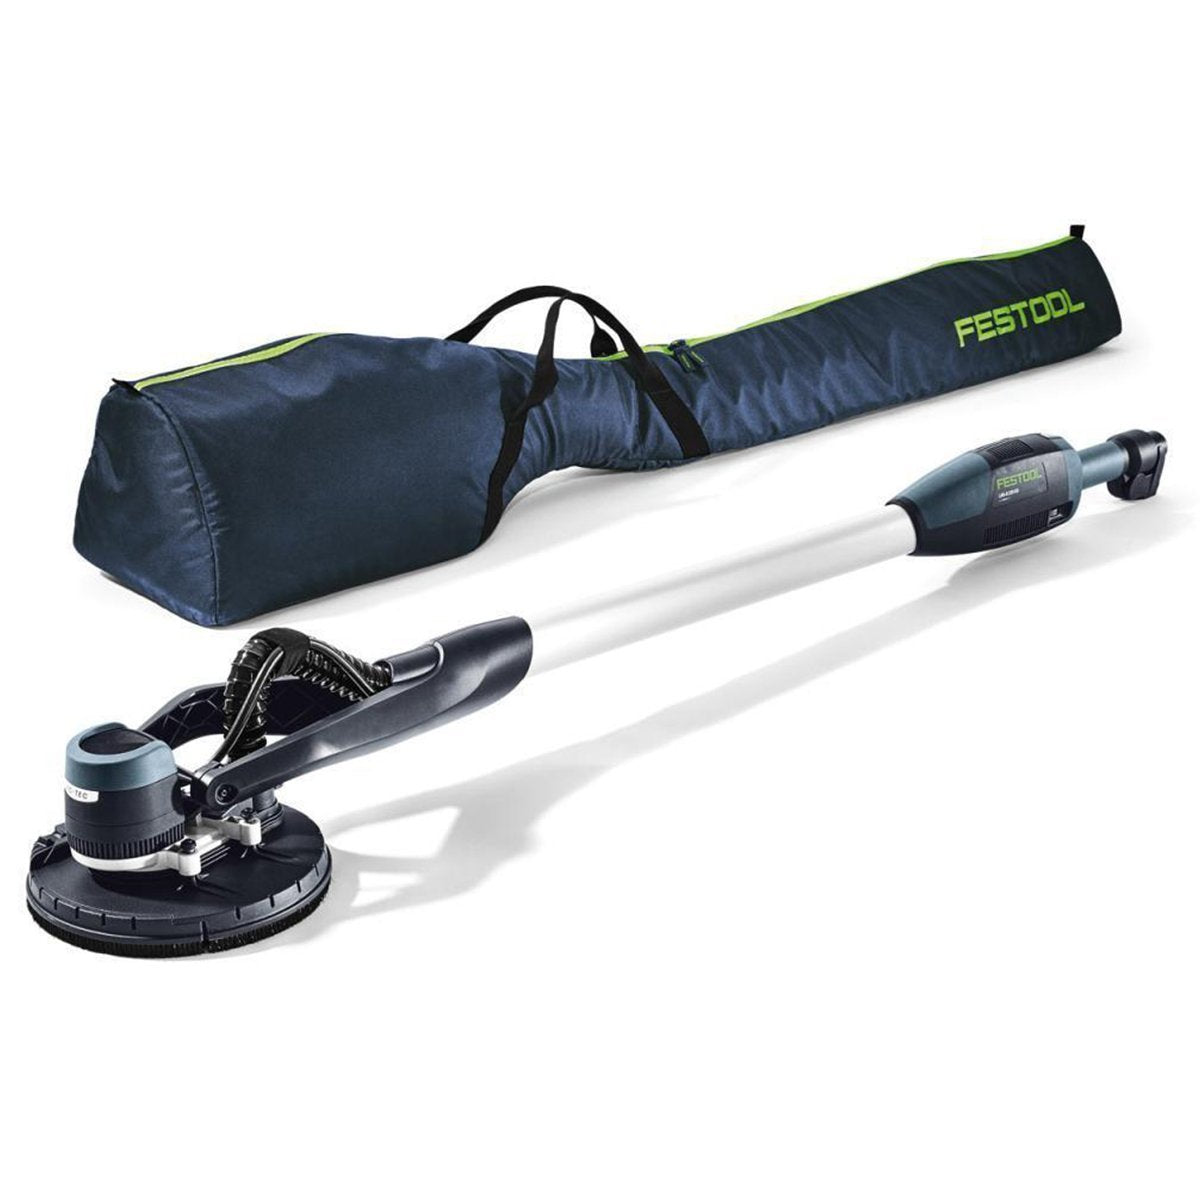 The Planex Easy has a long arm and brushless motor mounted over the sanding pad. Includes storage/transport bag.